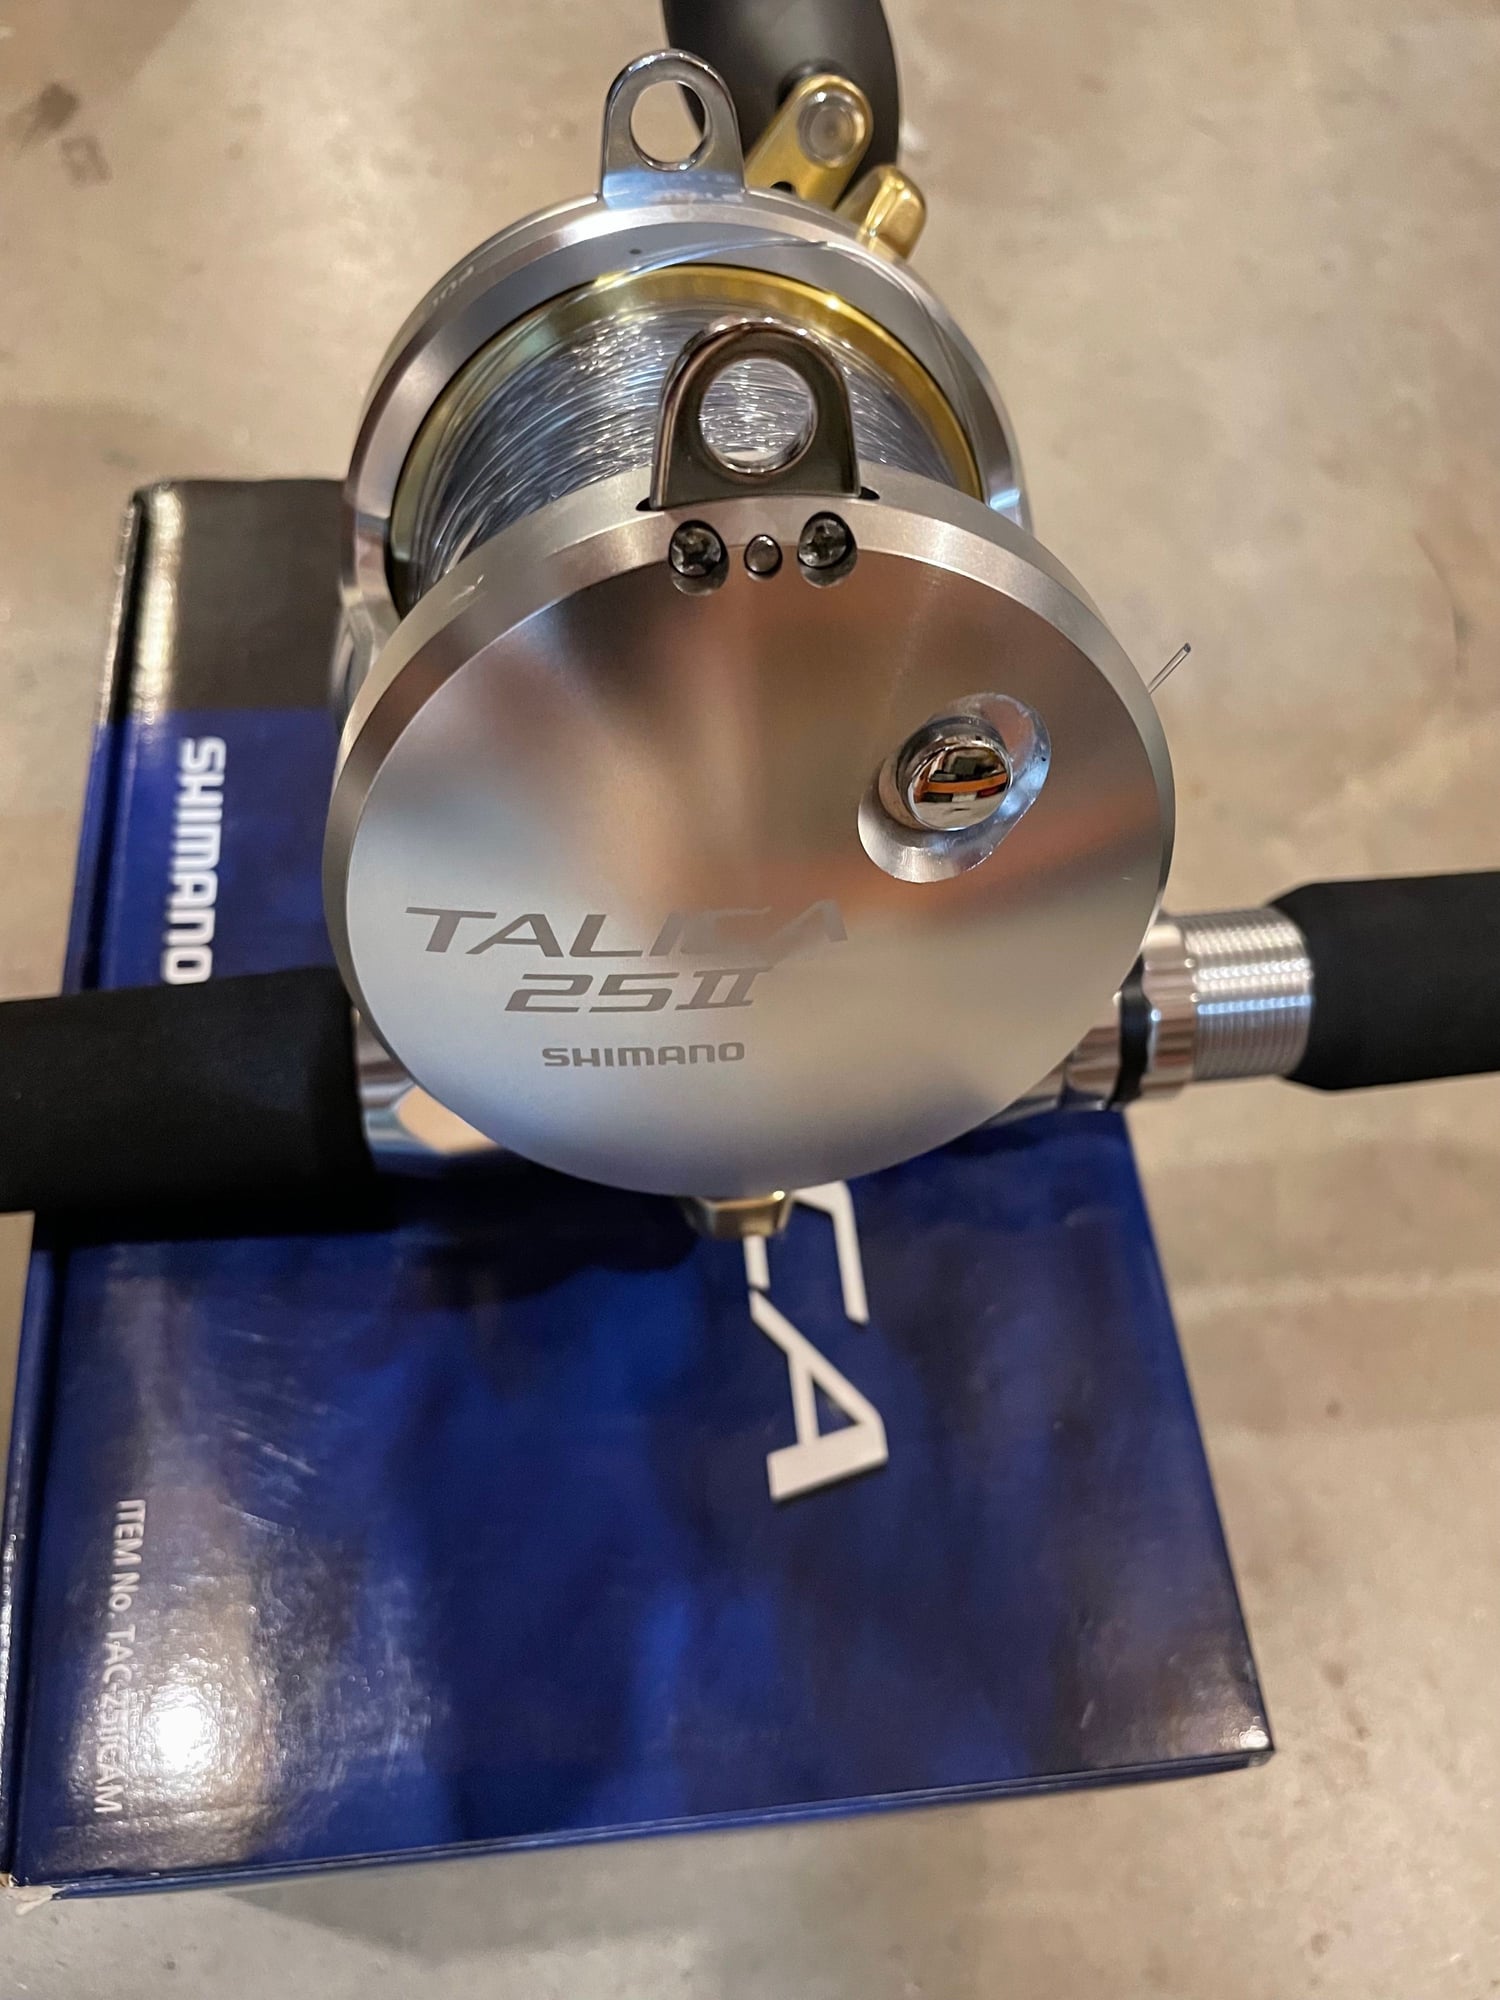 Talica 25 - Like new, spooled, w/ box and extra cam - The Hull Truth -  Boating and Fishing Forum